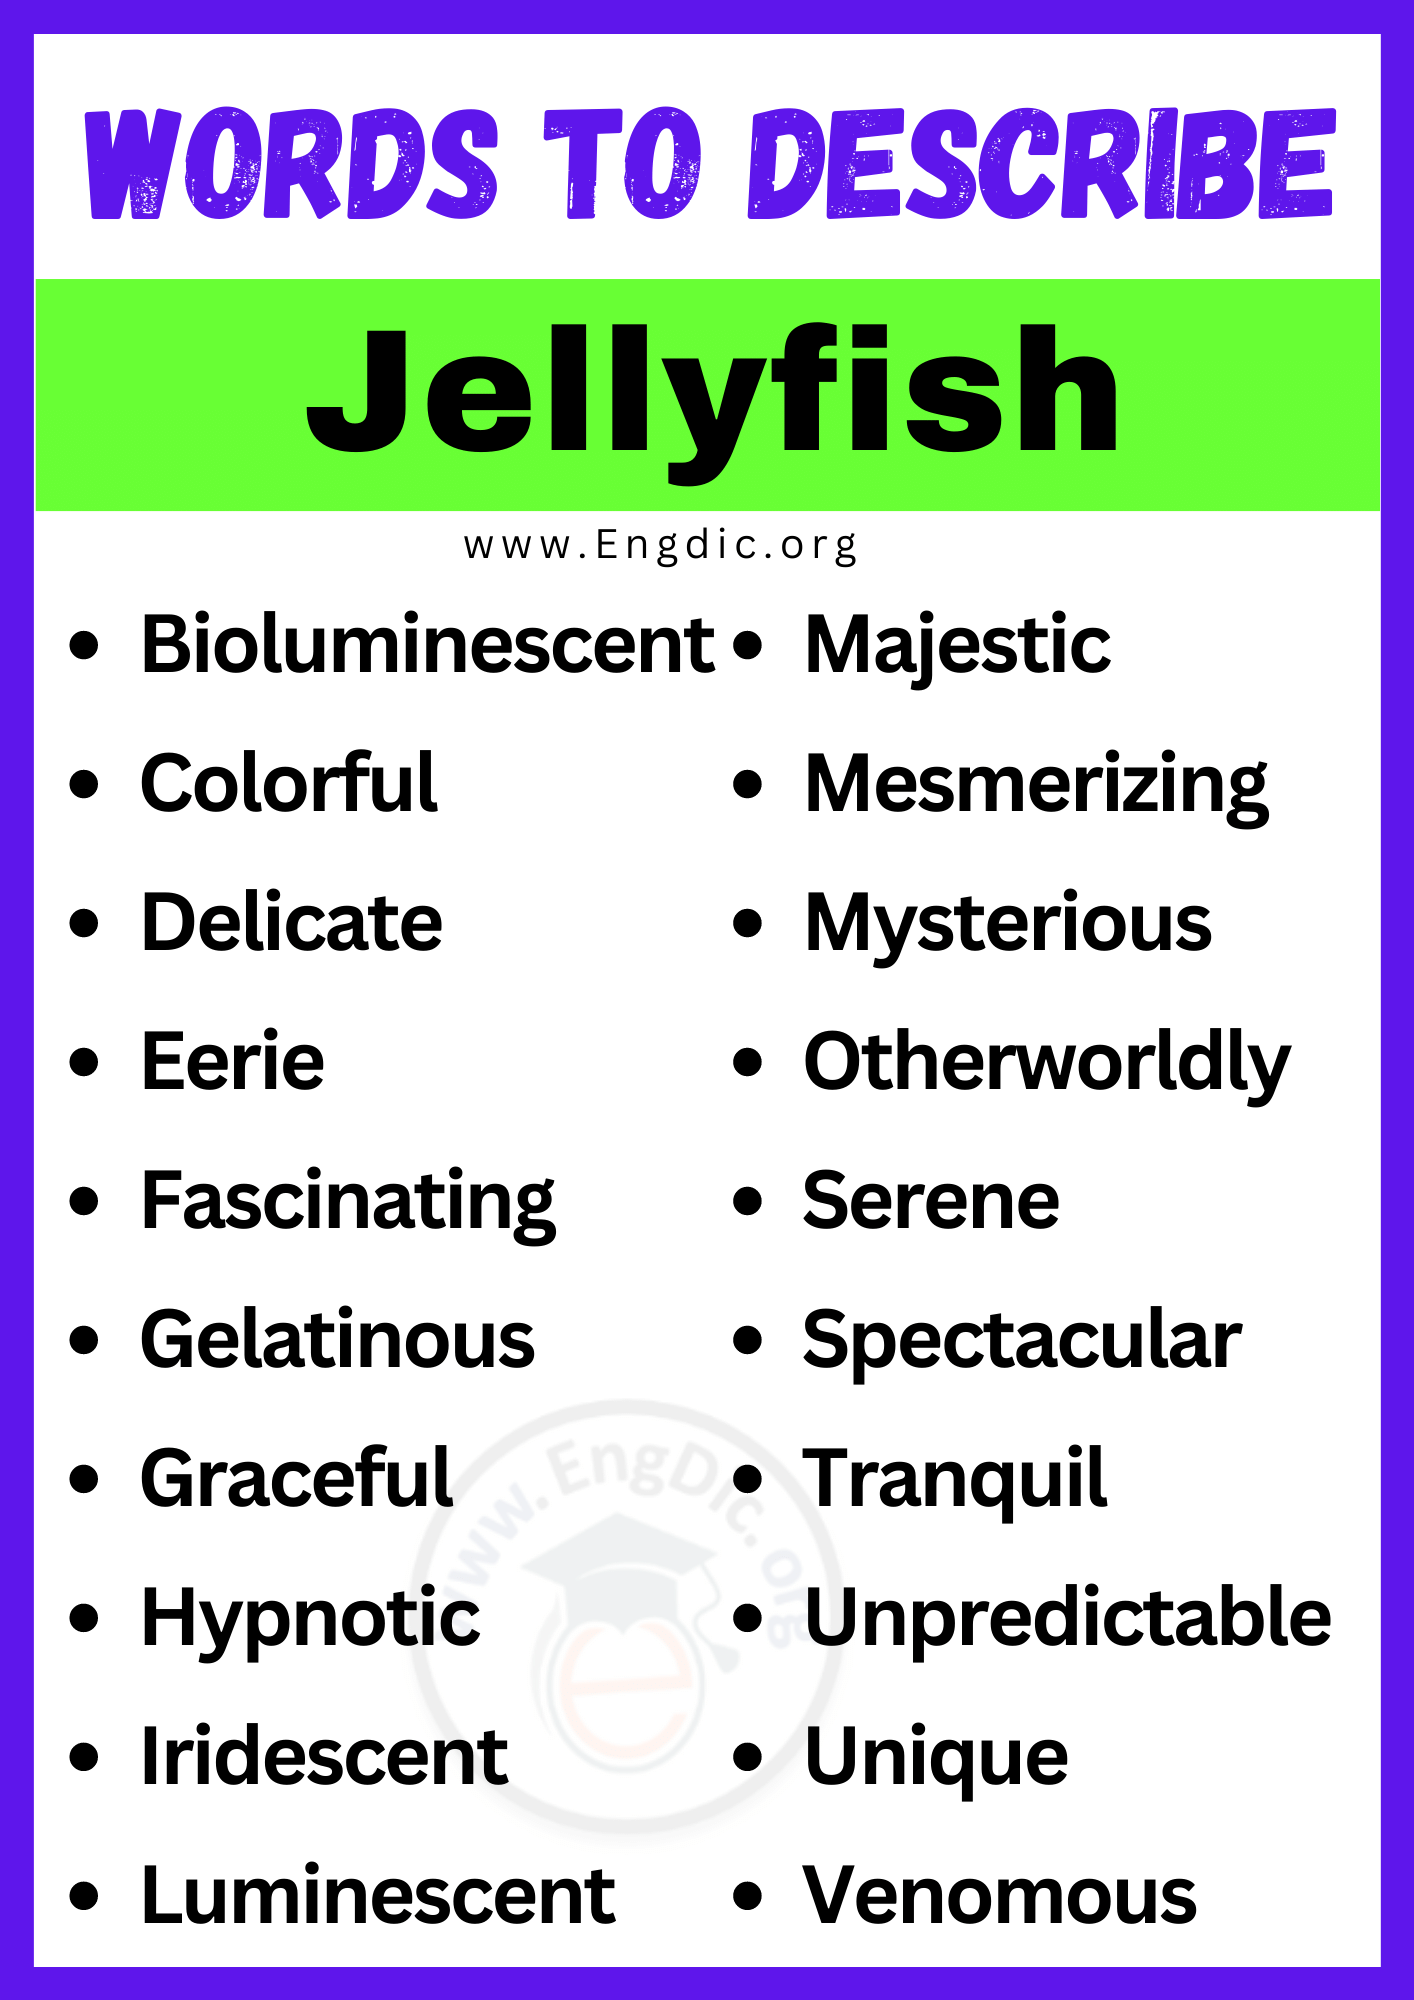 Words to Describe Jellyfish